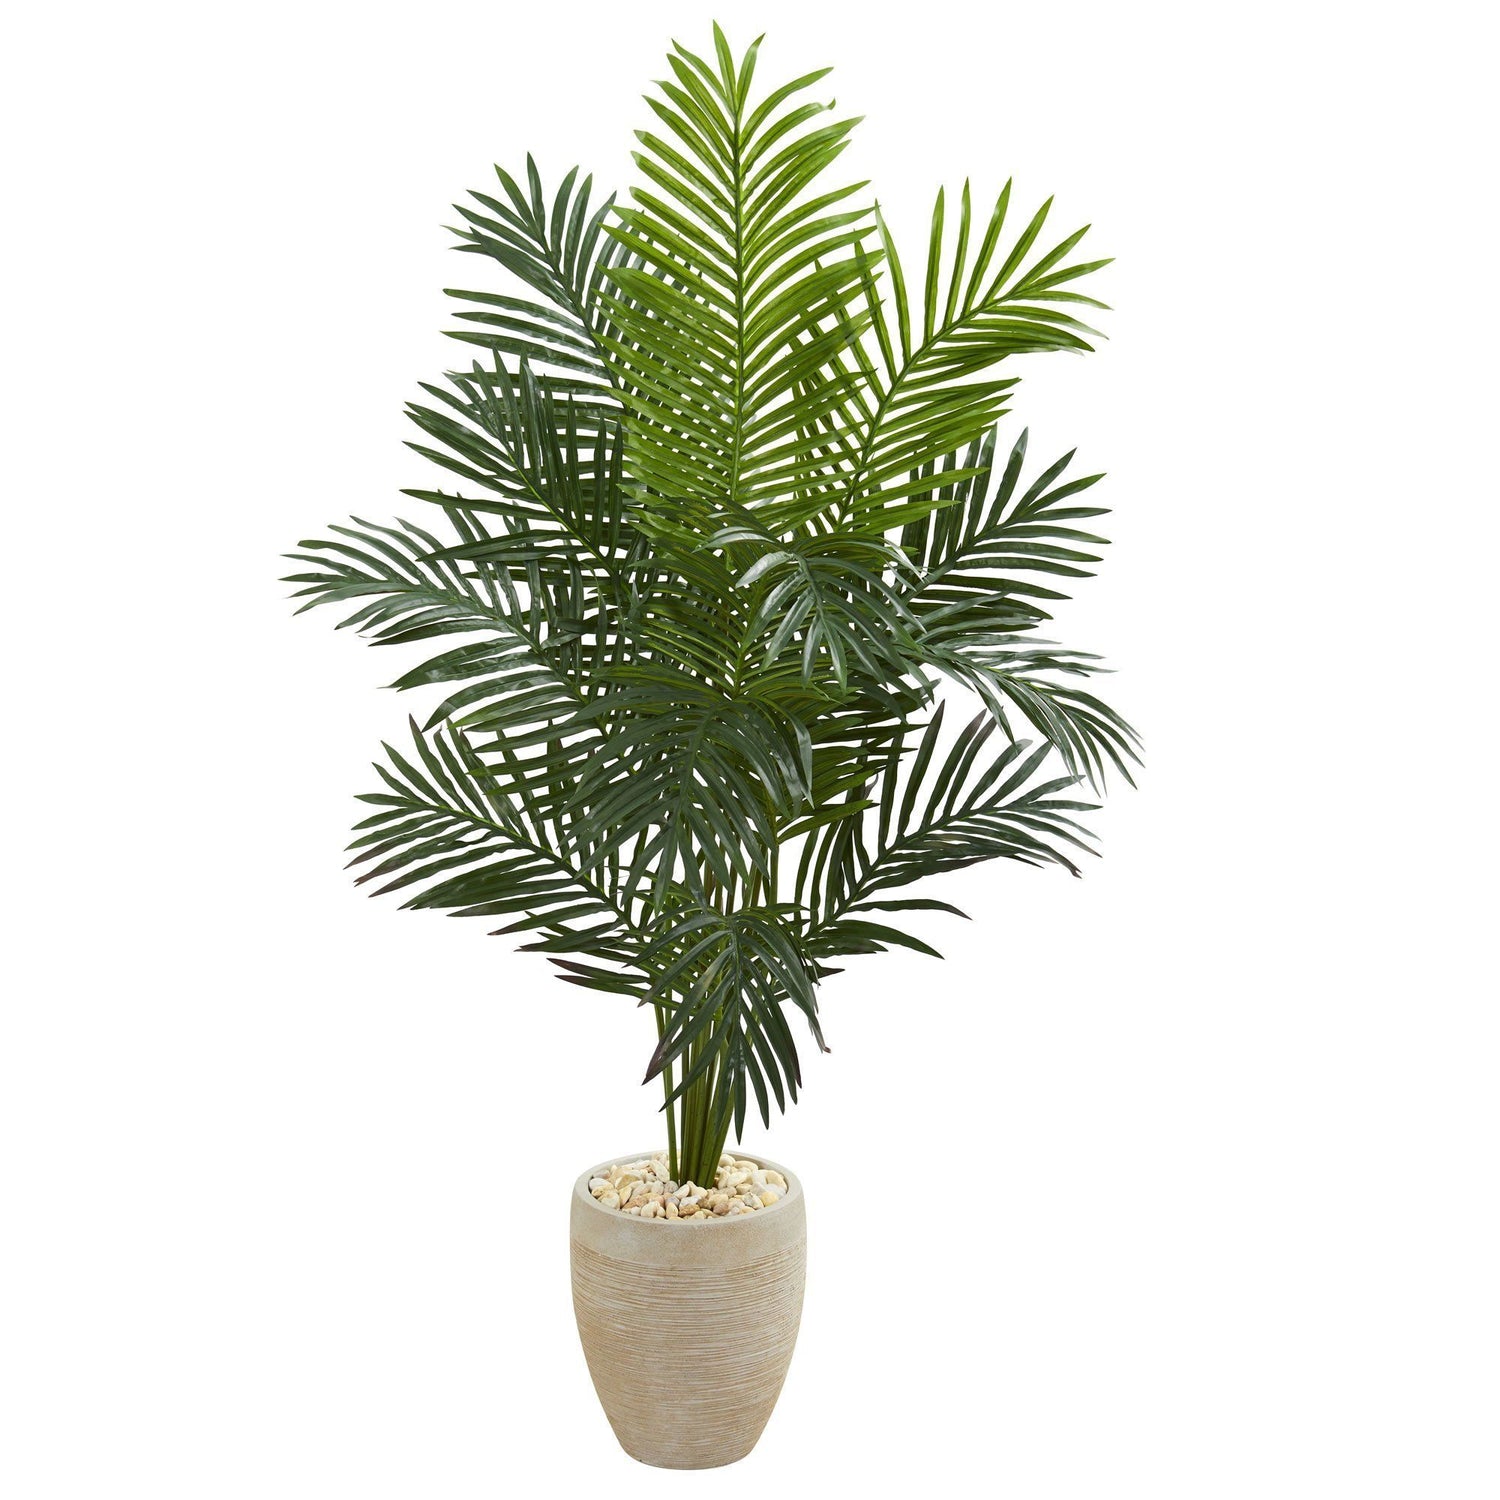 5.5’ Paradise Artificial Palm Tree in Sand Colored Planter